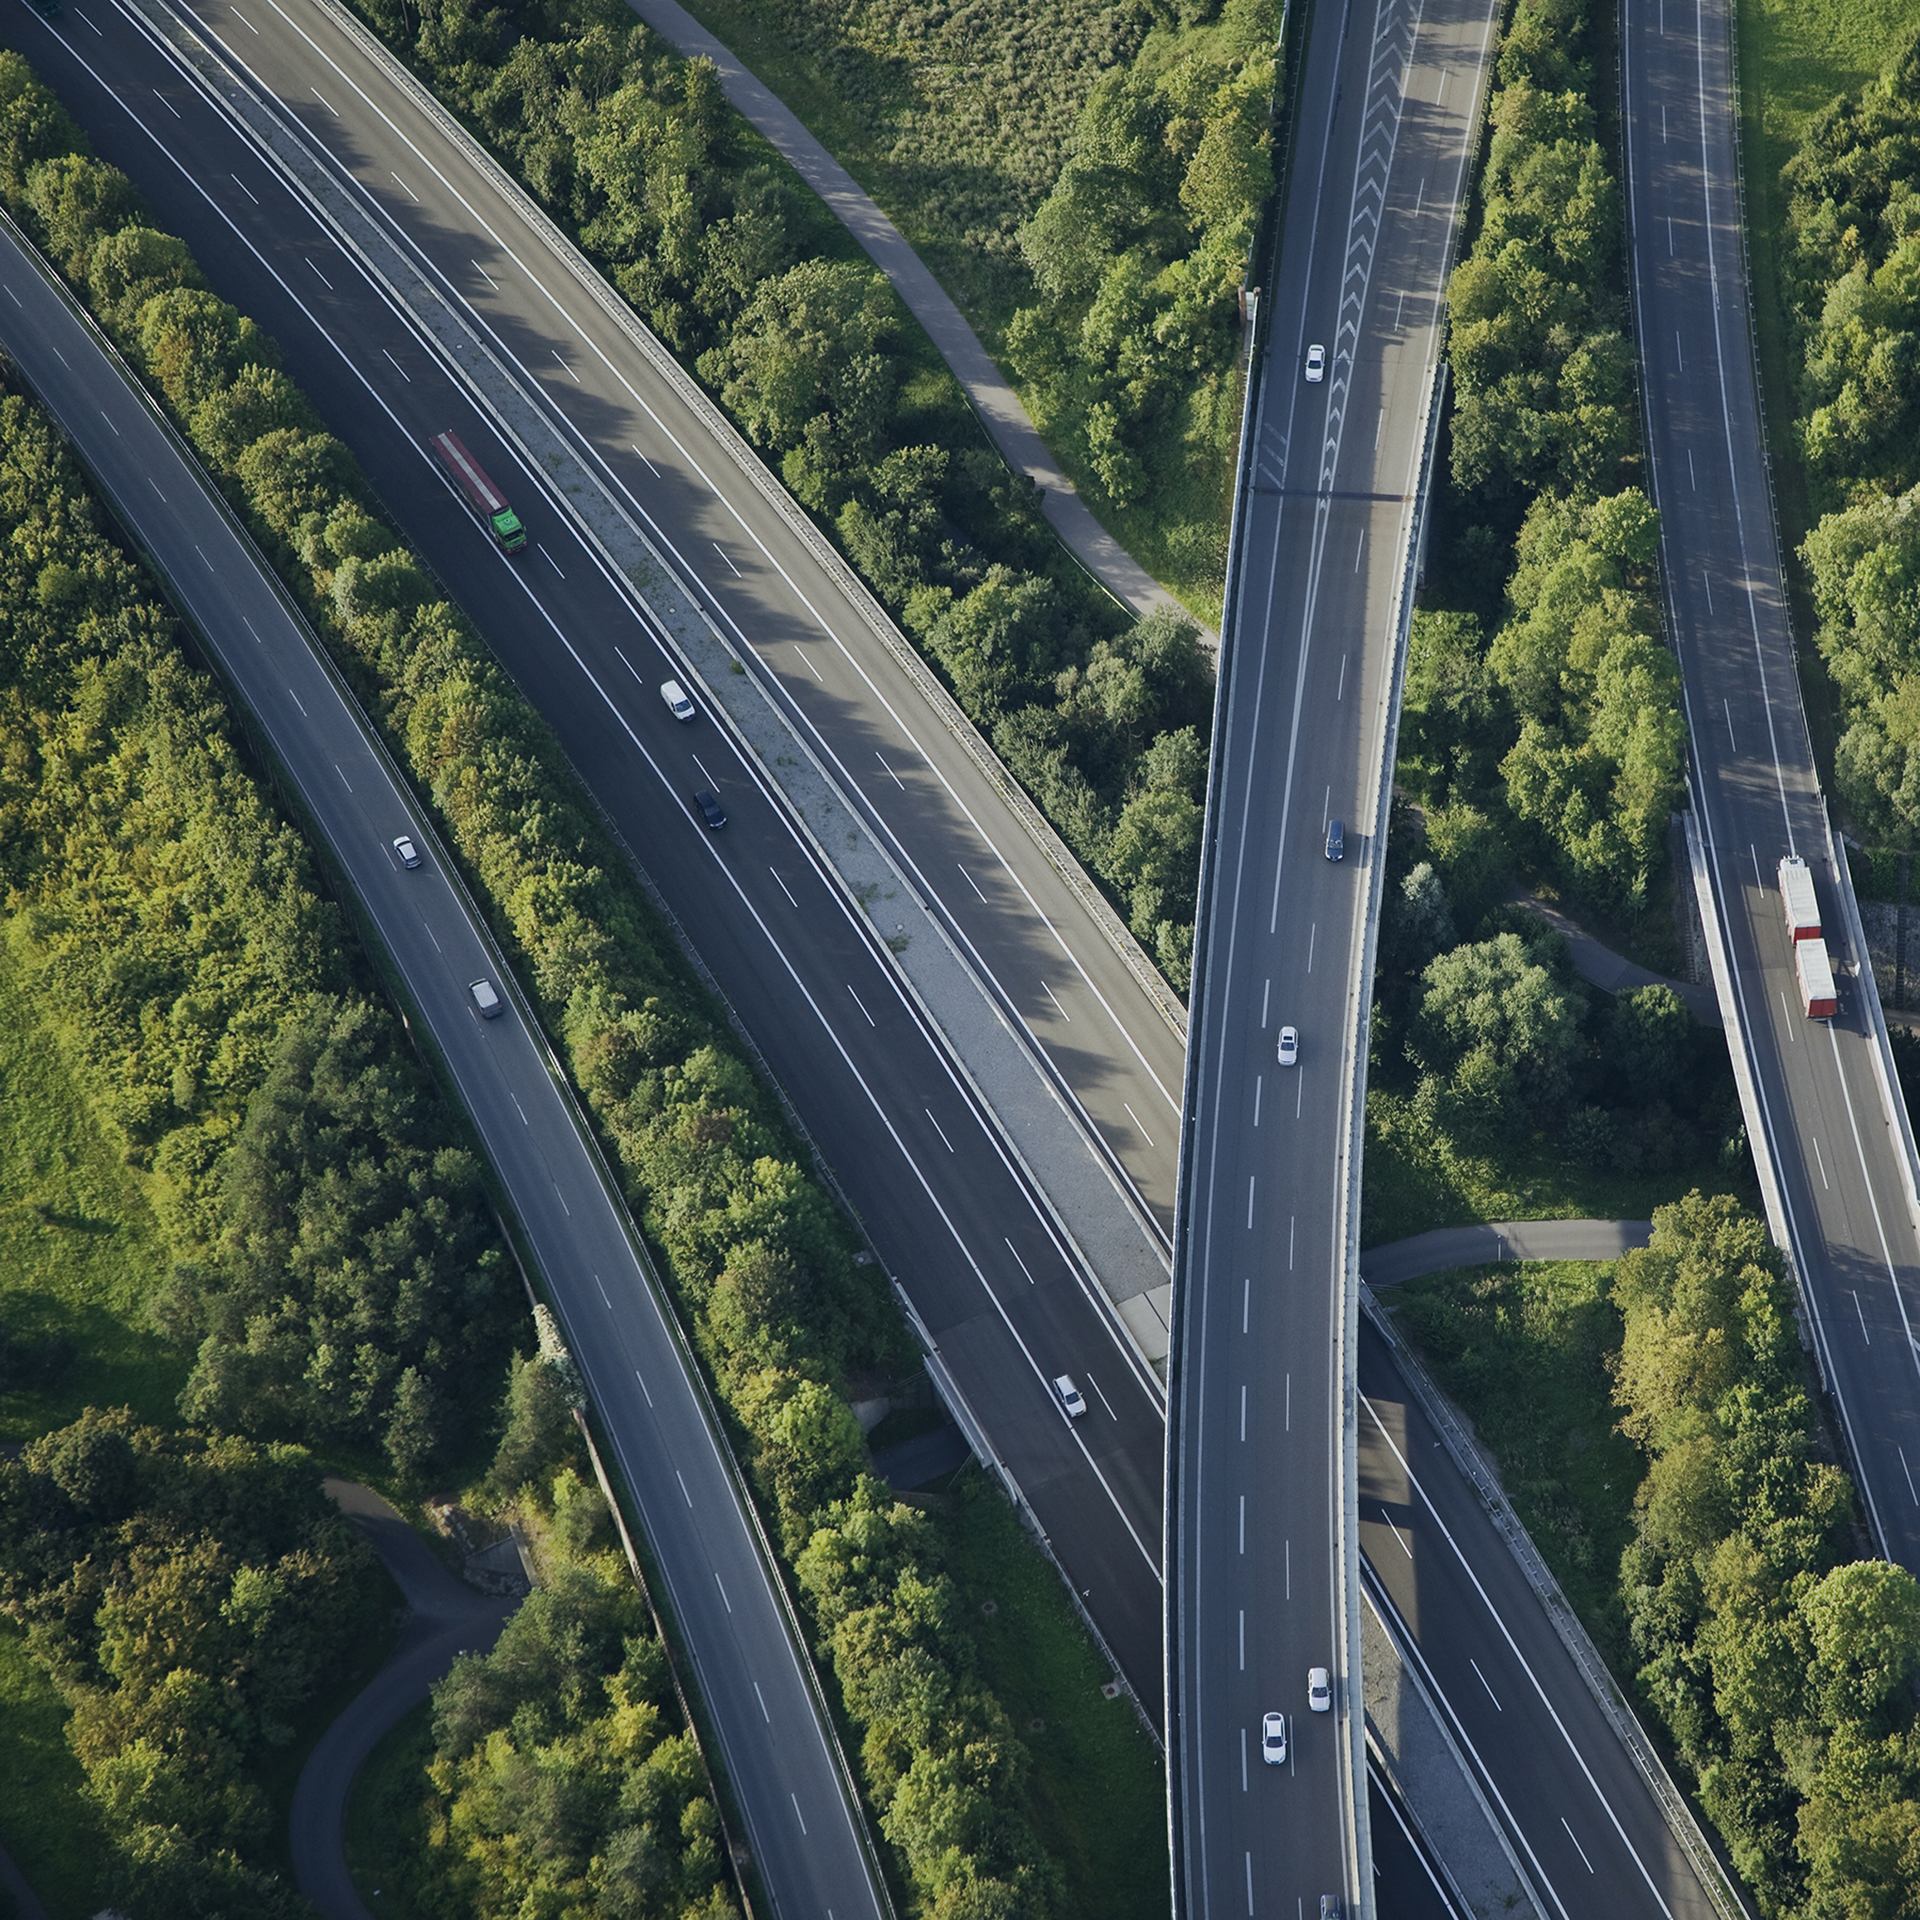 Aerial view of highways through green nature